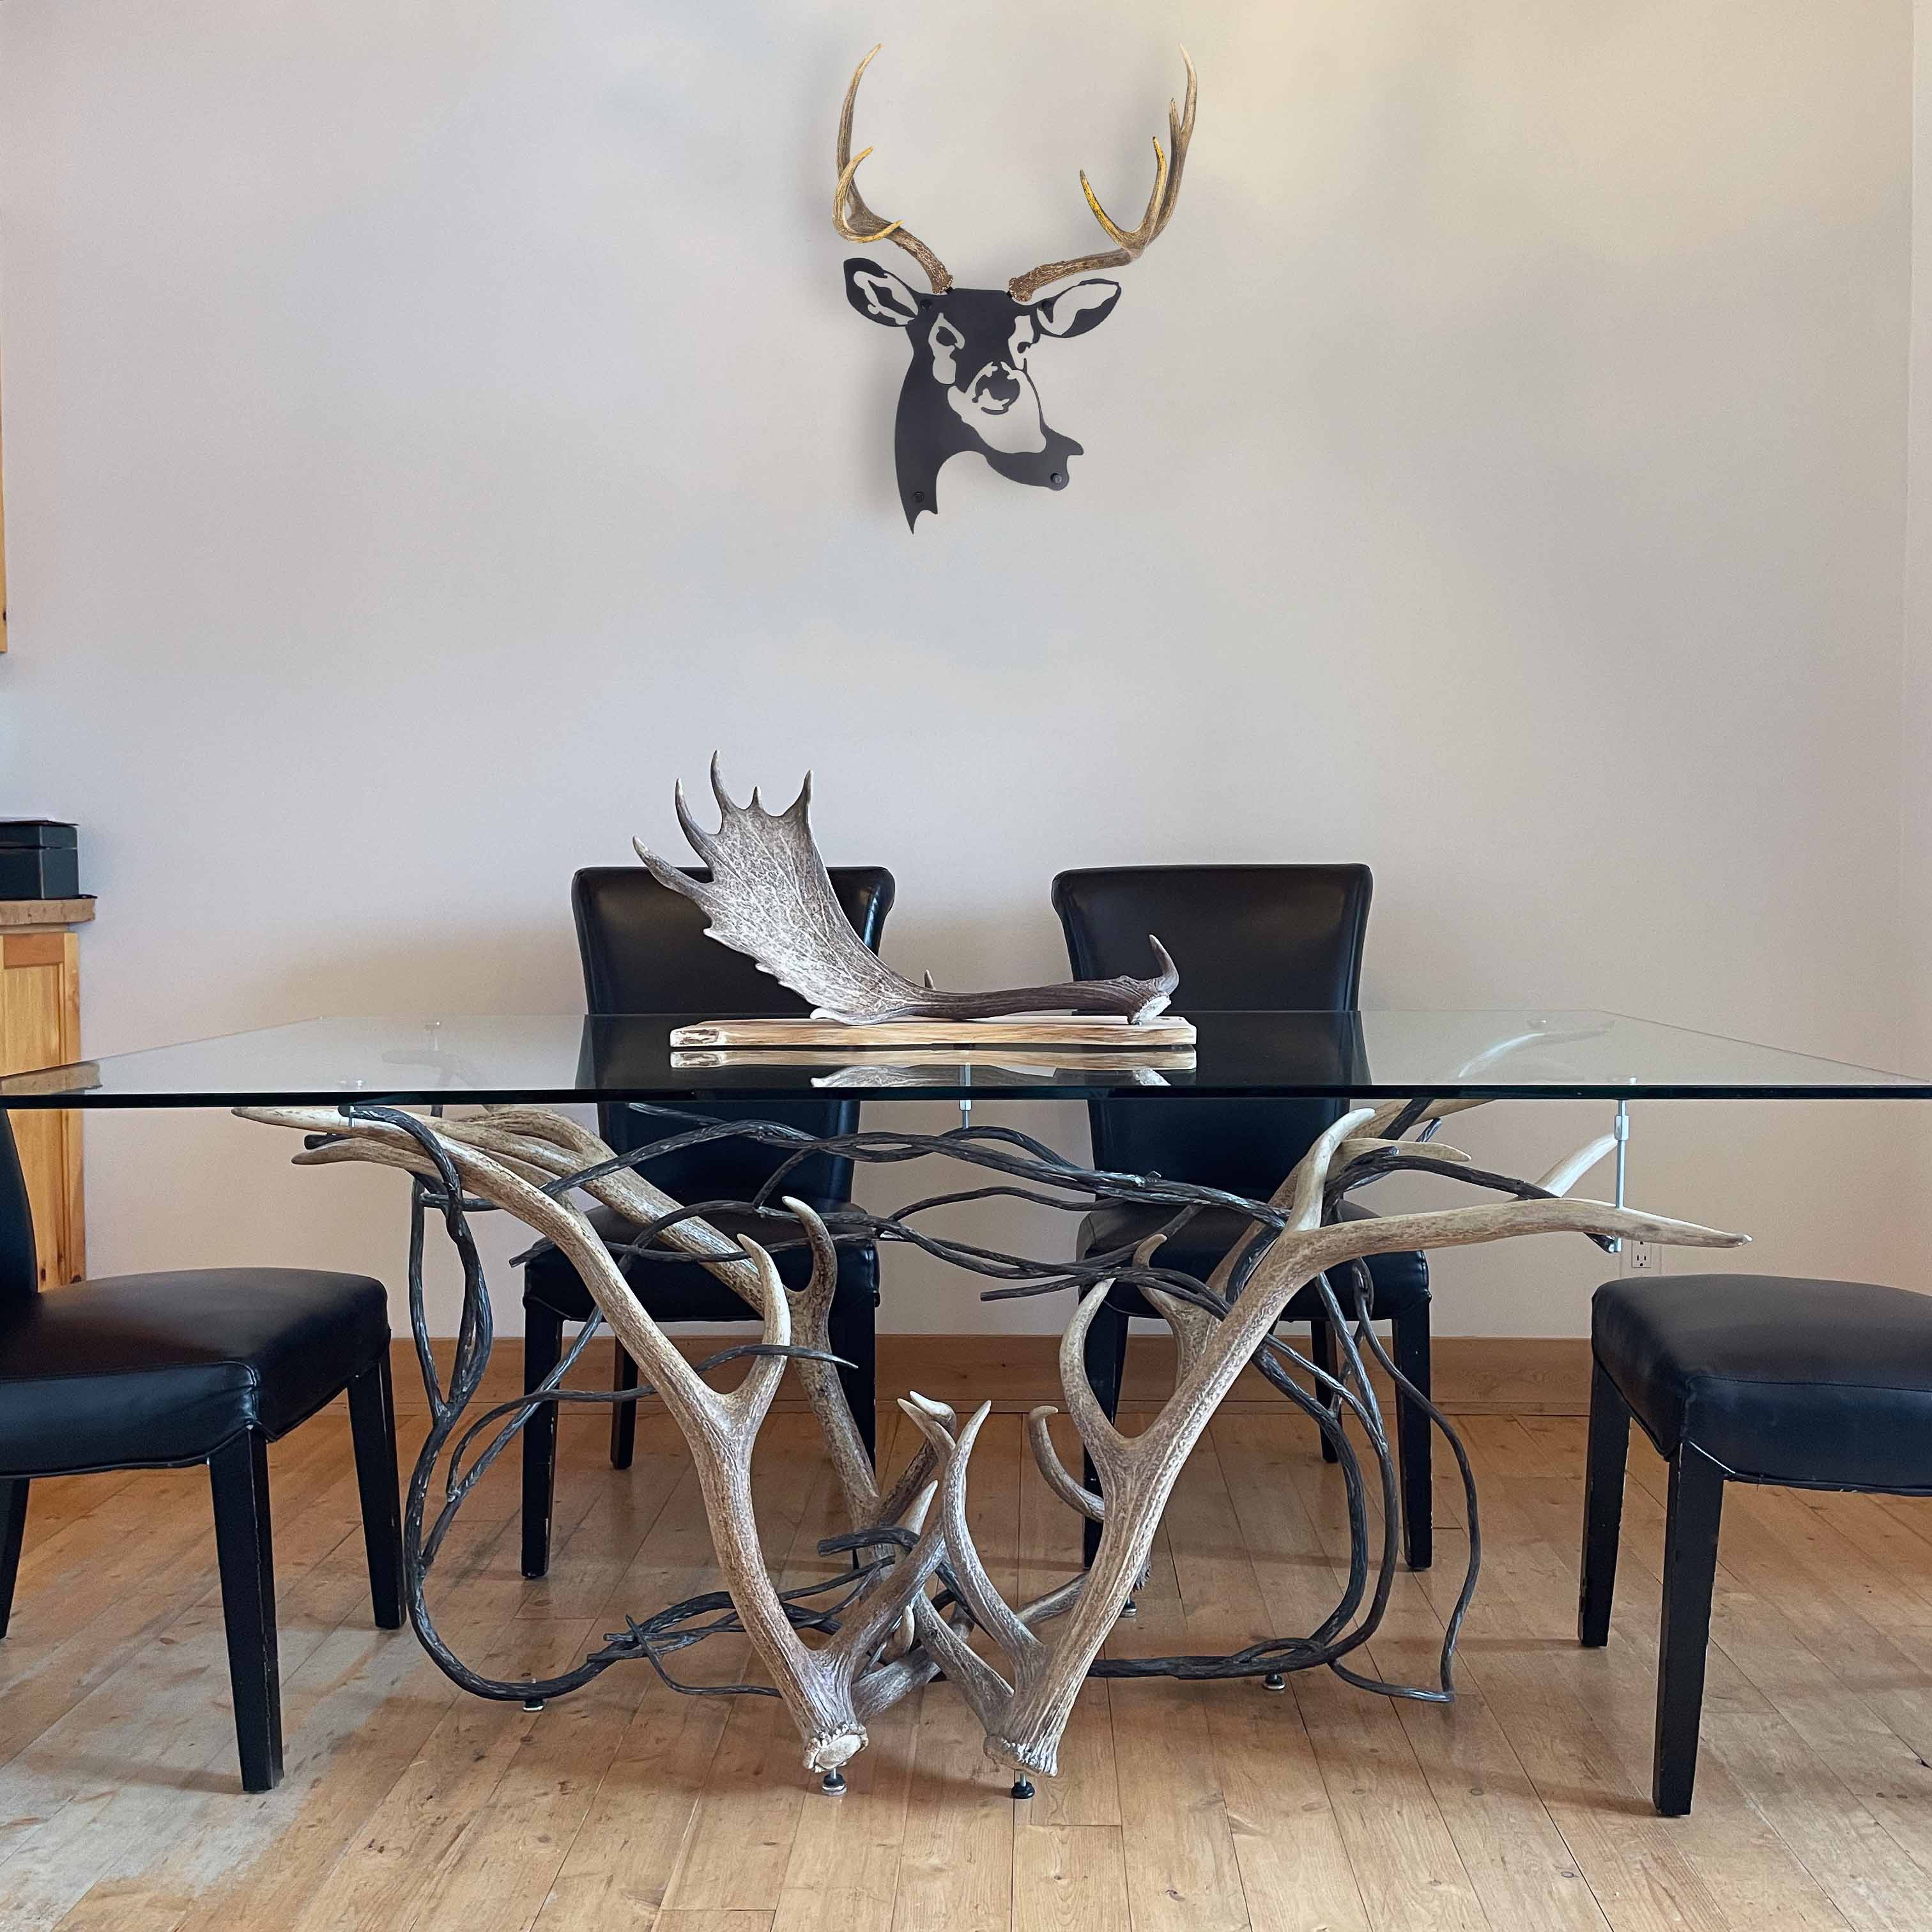 A image of an antler & metal wall decor, a table base, and a fallow deer antler home decor by Dekor Nature